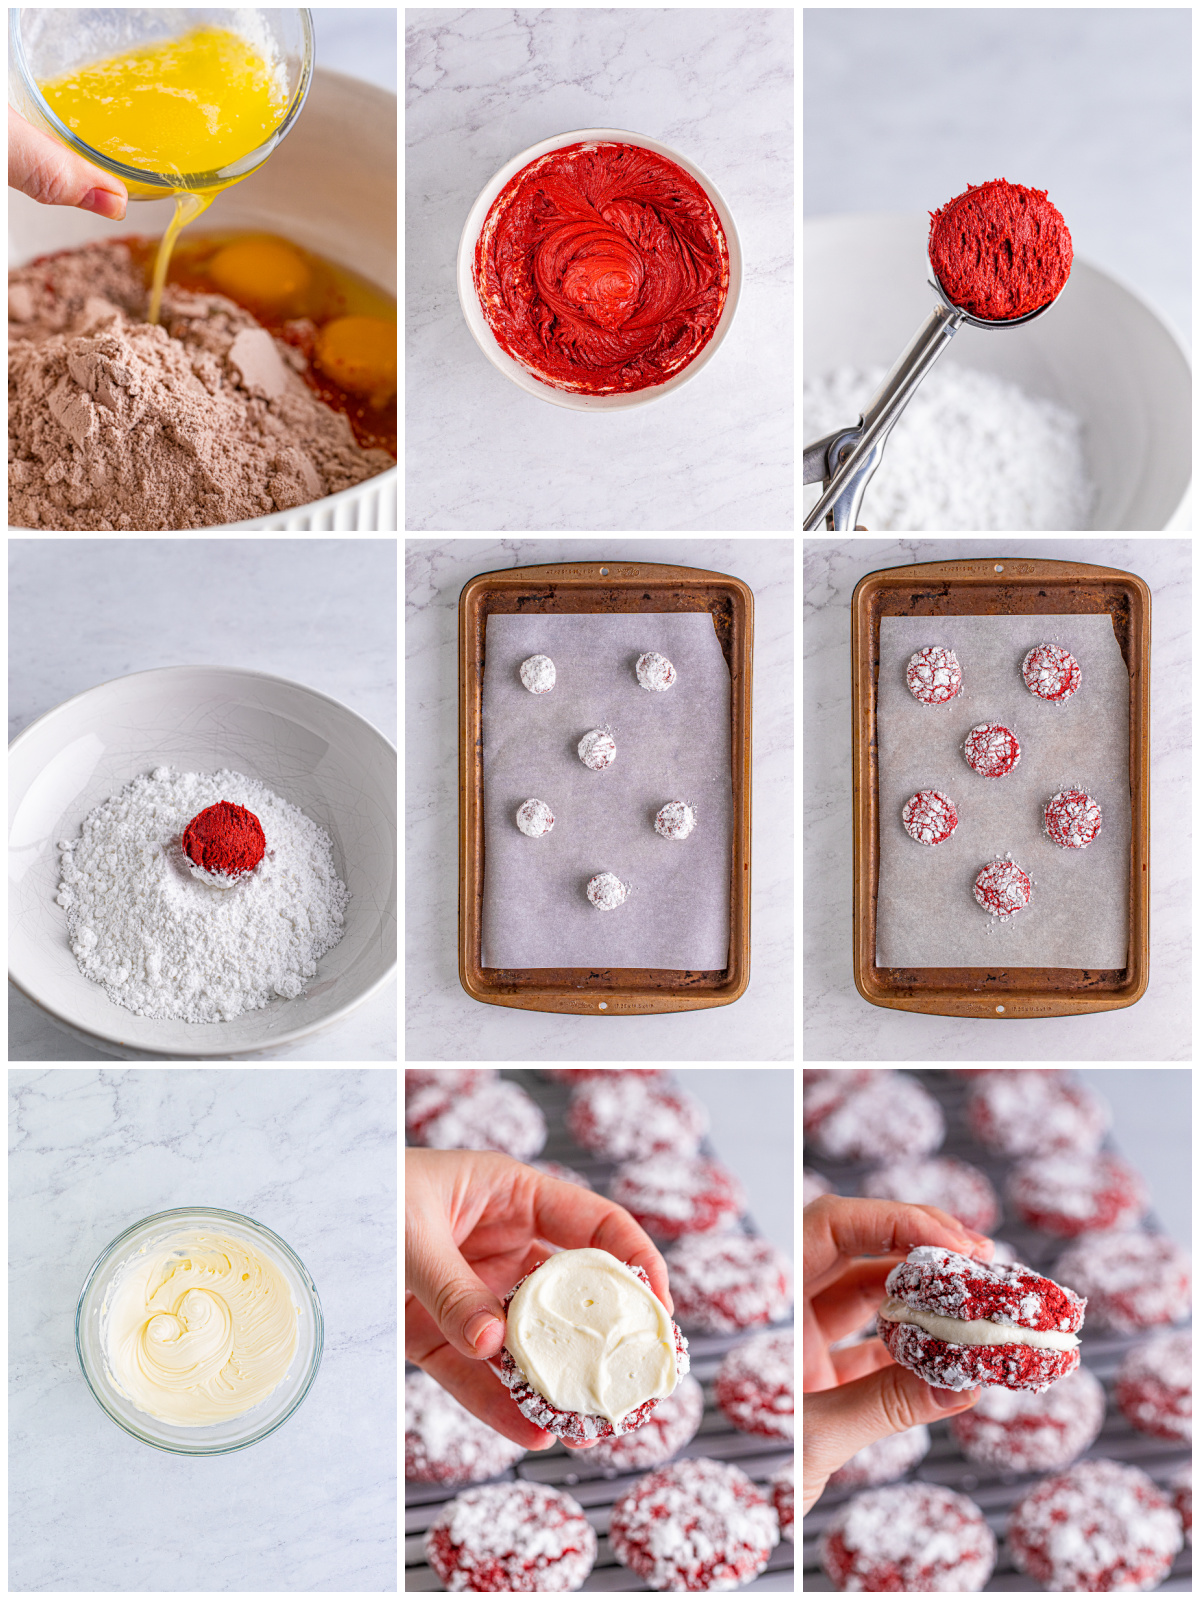 Step by step photos on how to make Red Velvet Sandwich Cookies